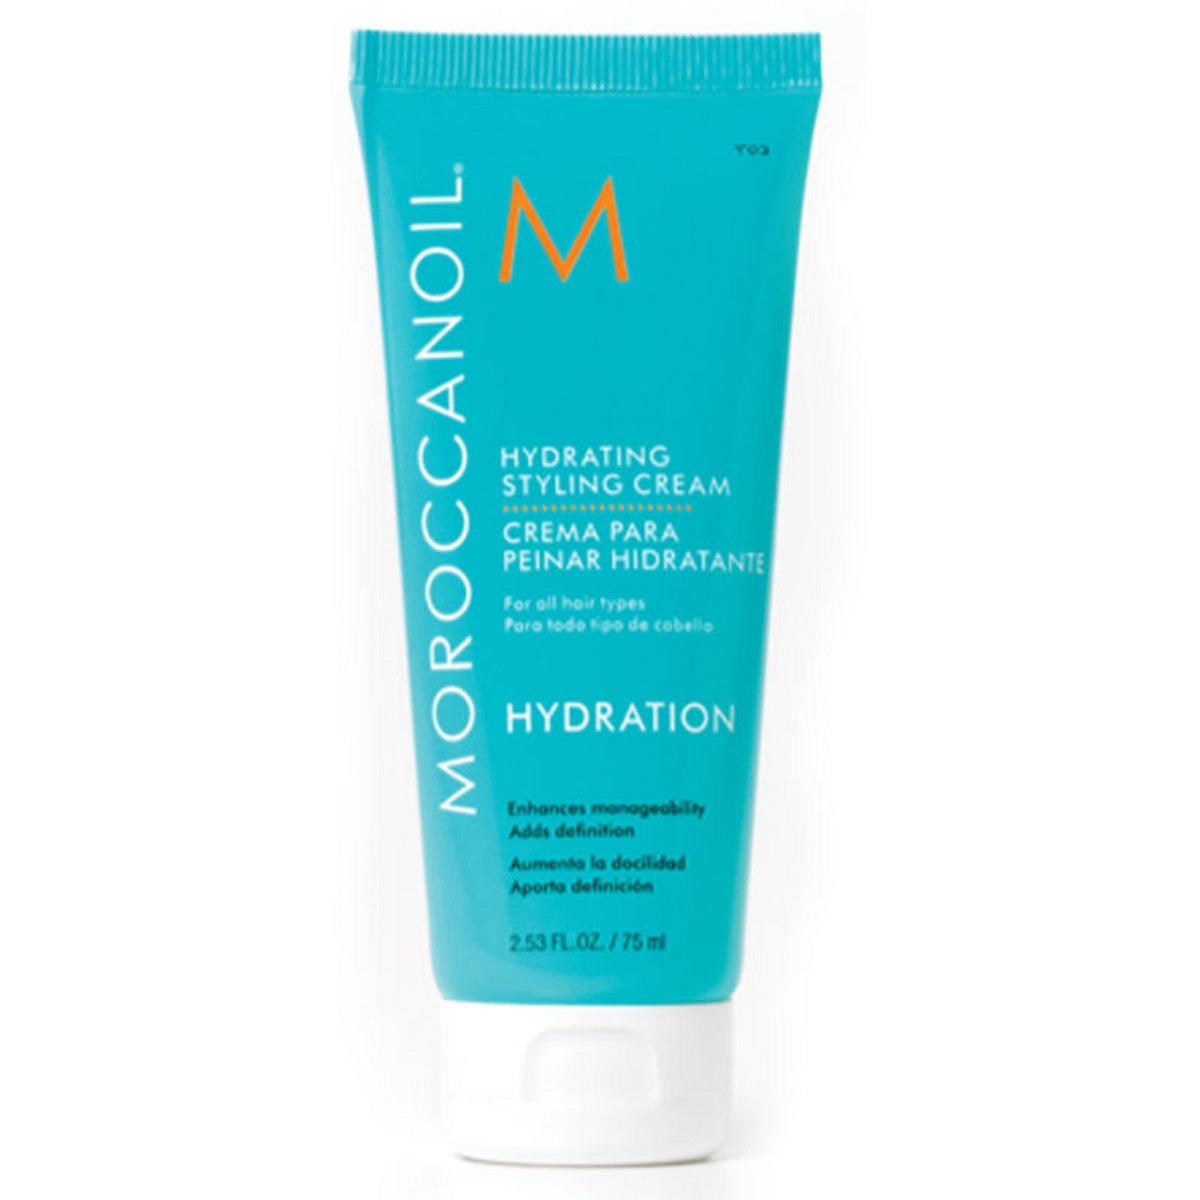 Moroccanoil Travel Size Hydrating Styling Cream